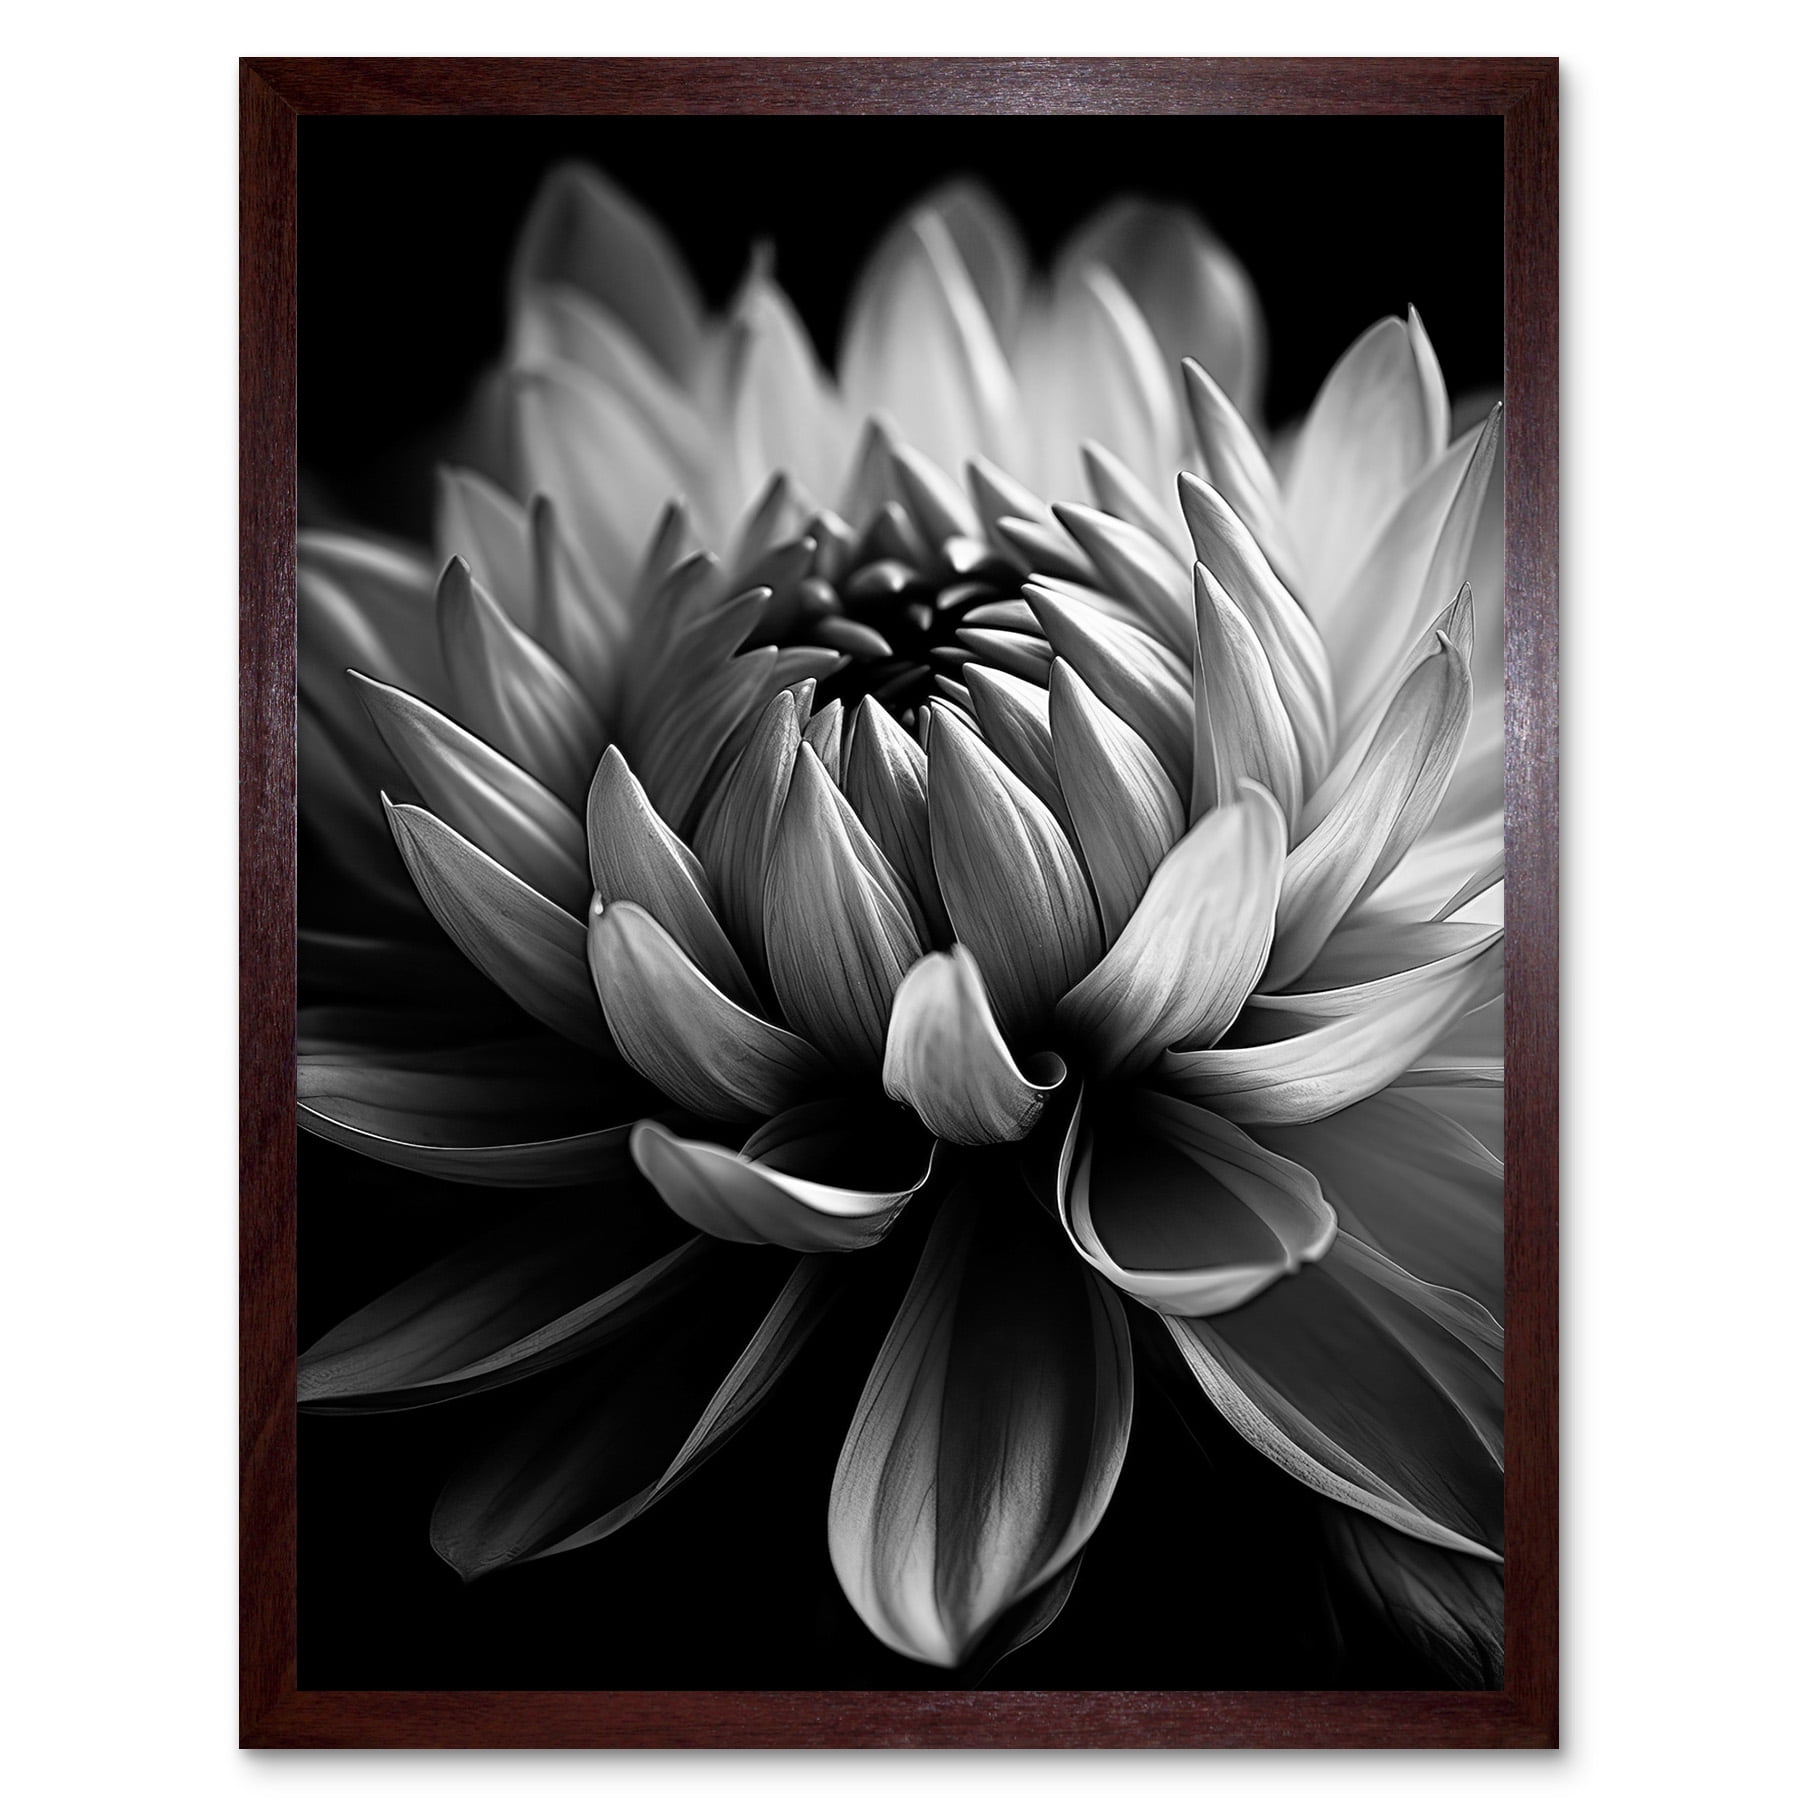 30x30 Frame Black With White Picture Mat For 30x30 Print - Or 34x34 Art  Without the Photo Mat 